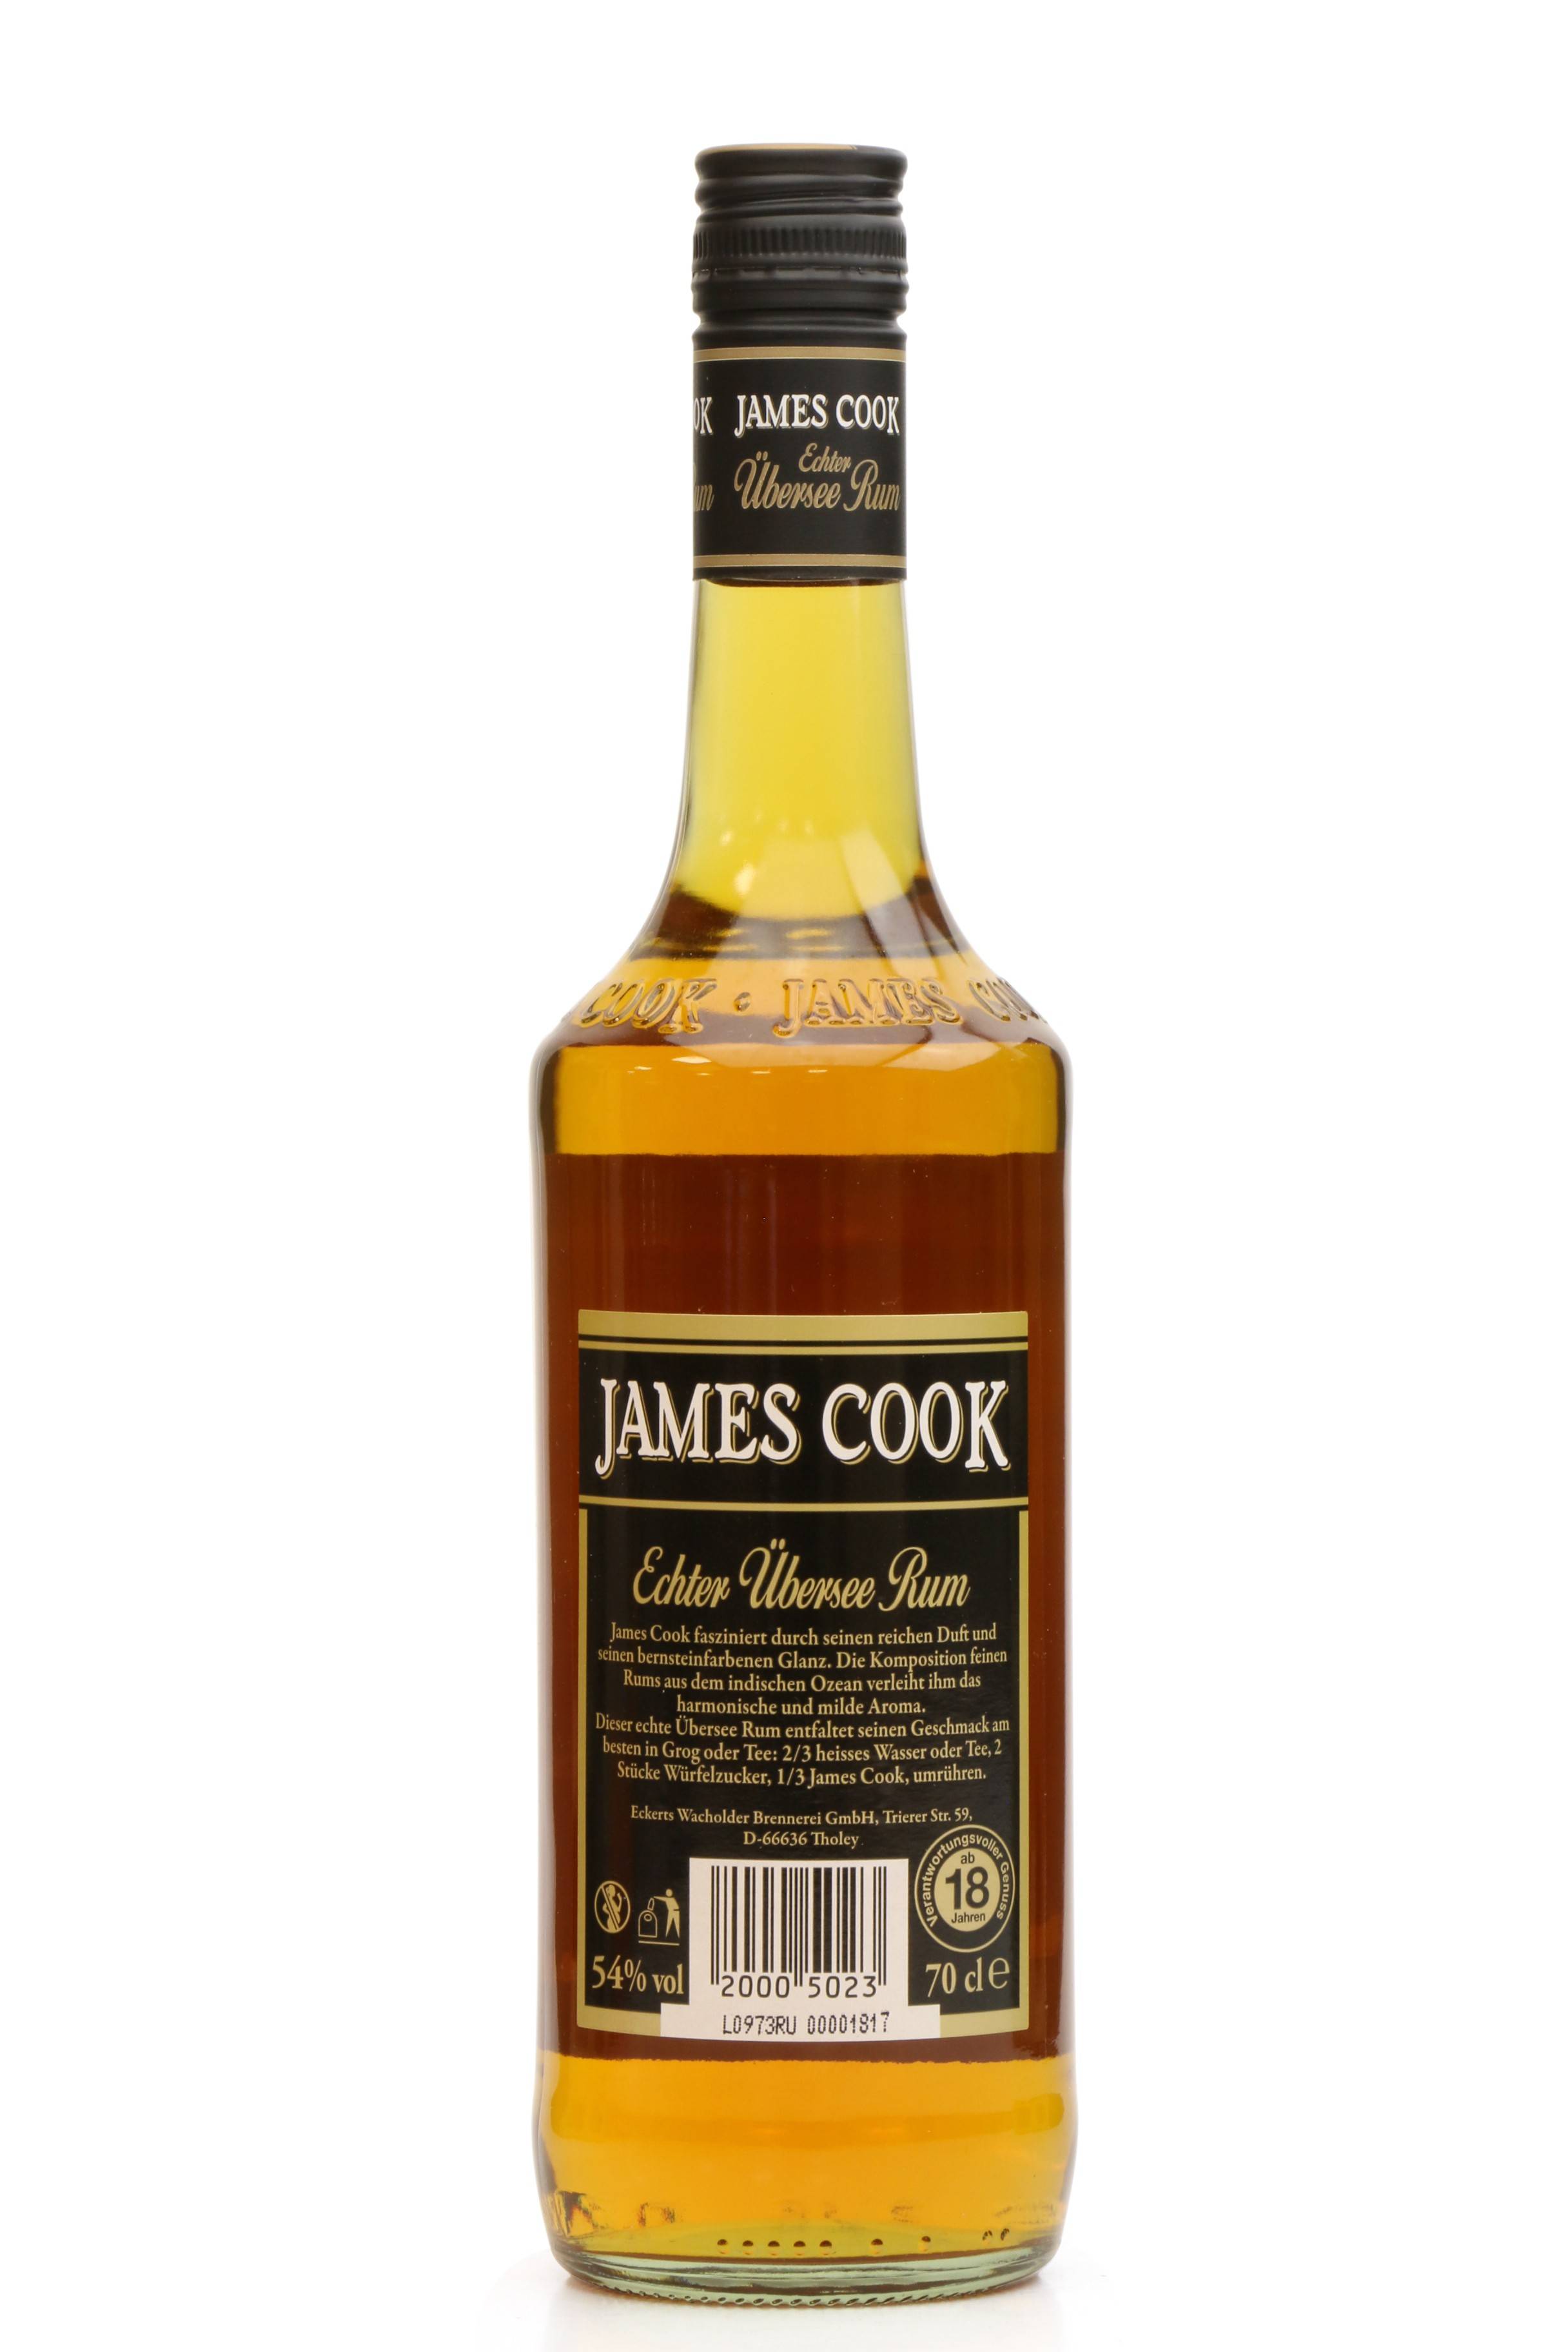 James Cook Echter Ubersee Rum (54%) - Just Whisky Auctions